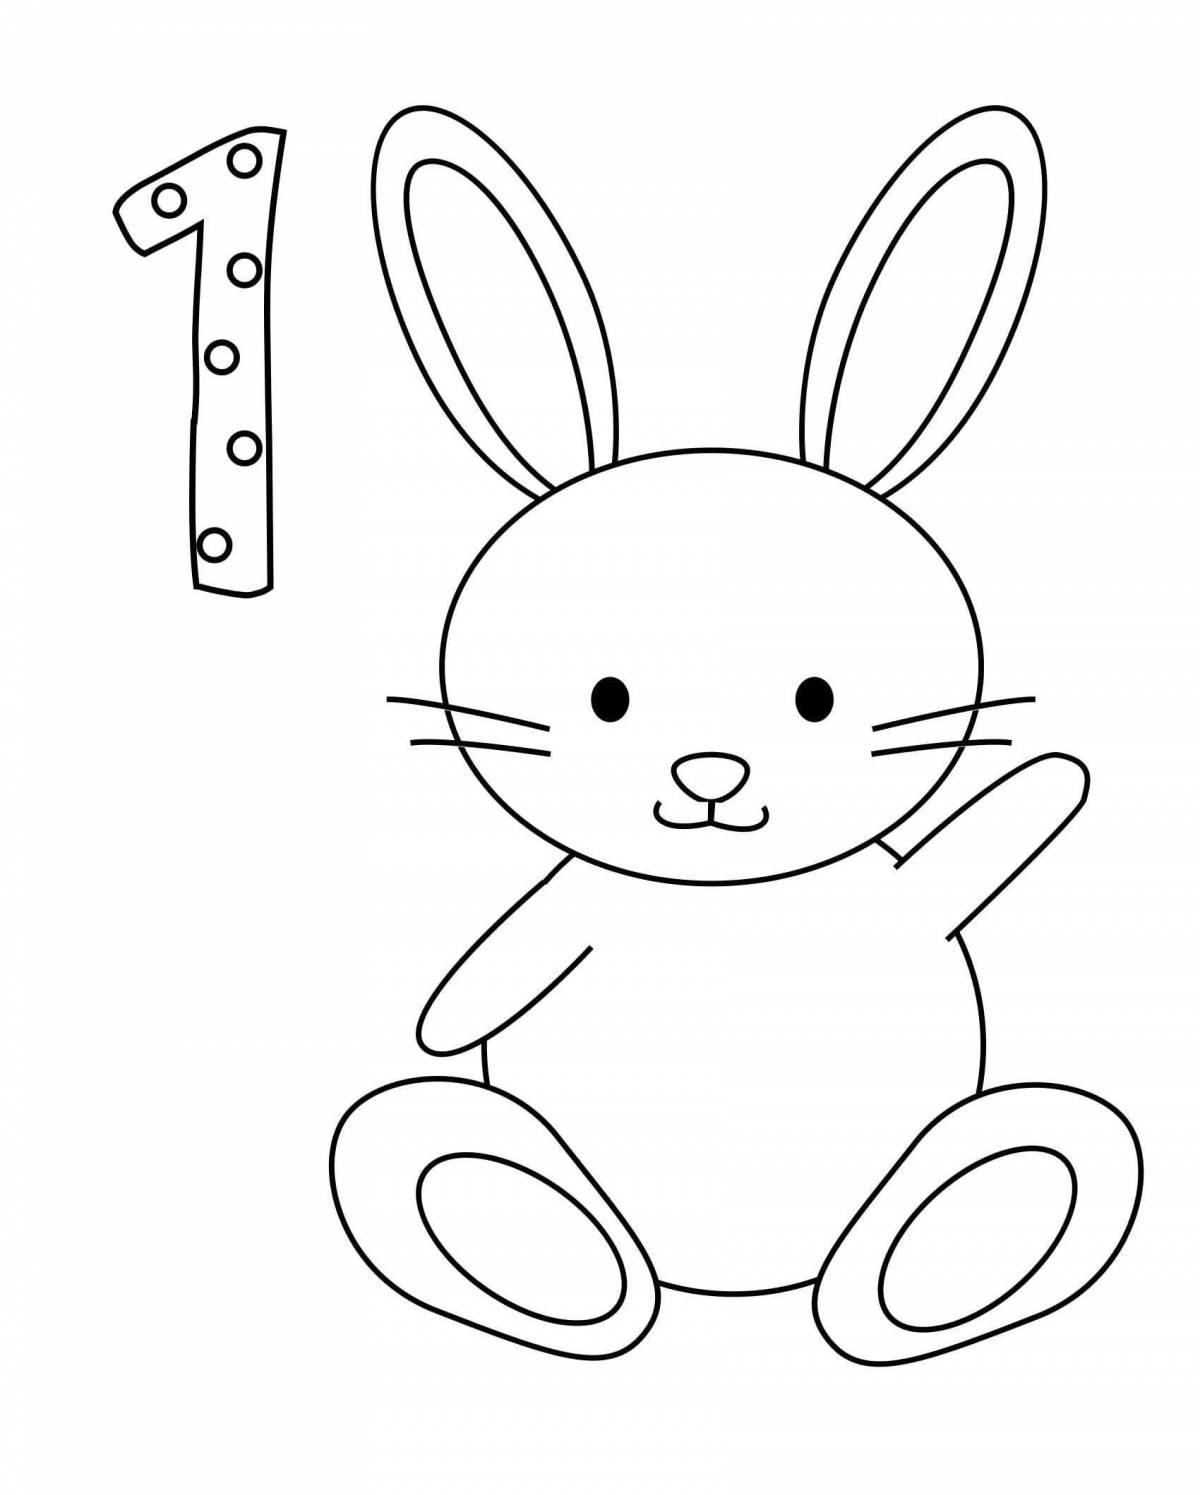 Coloring book glowing hare for children 2-3 years old